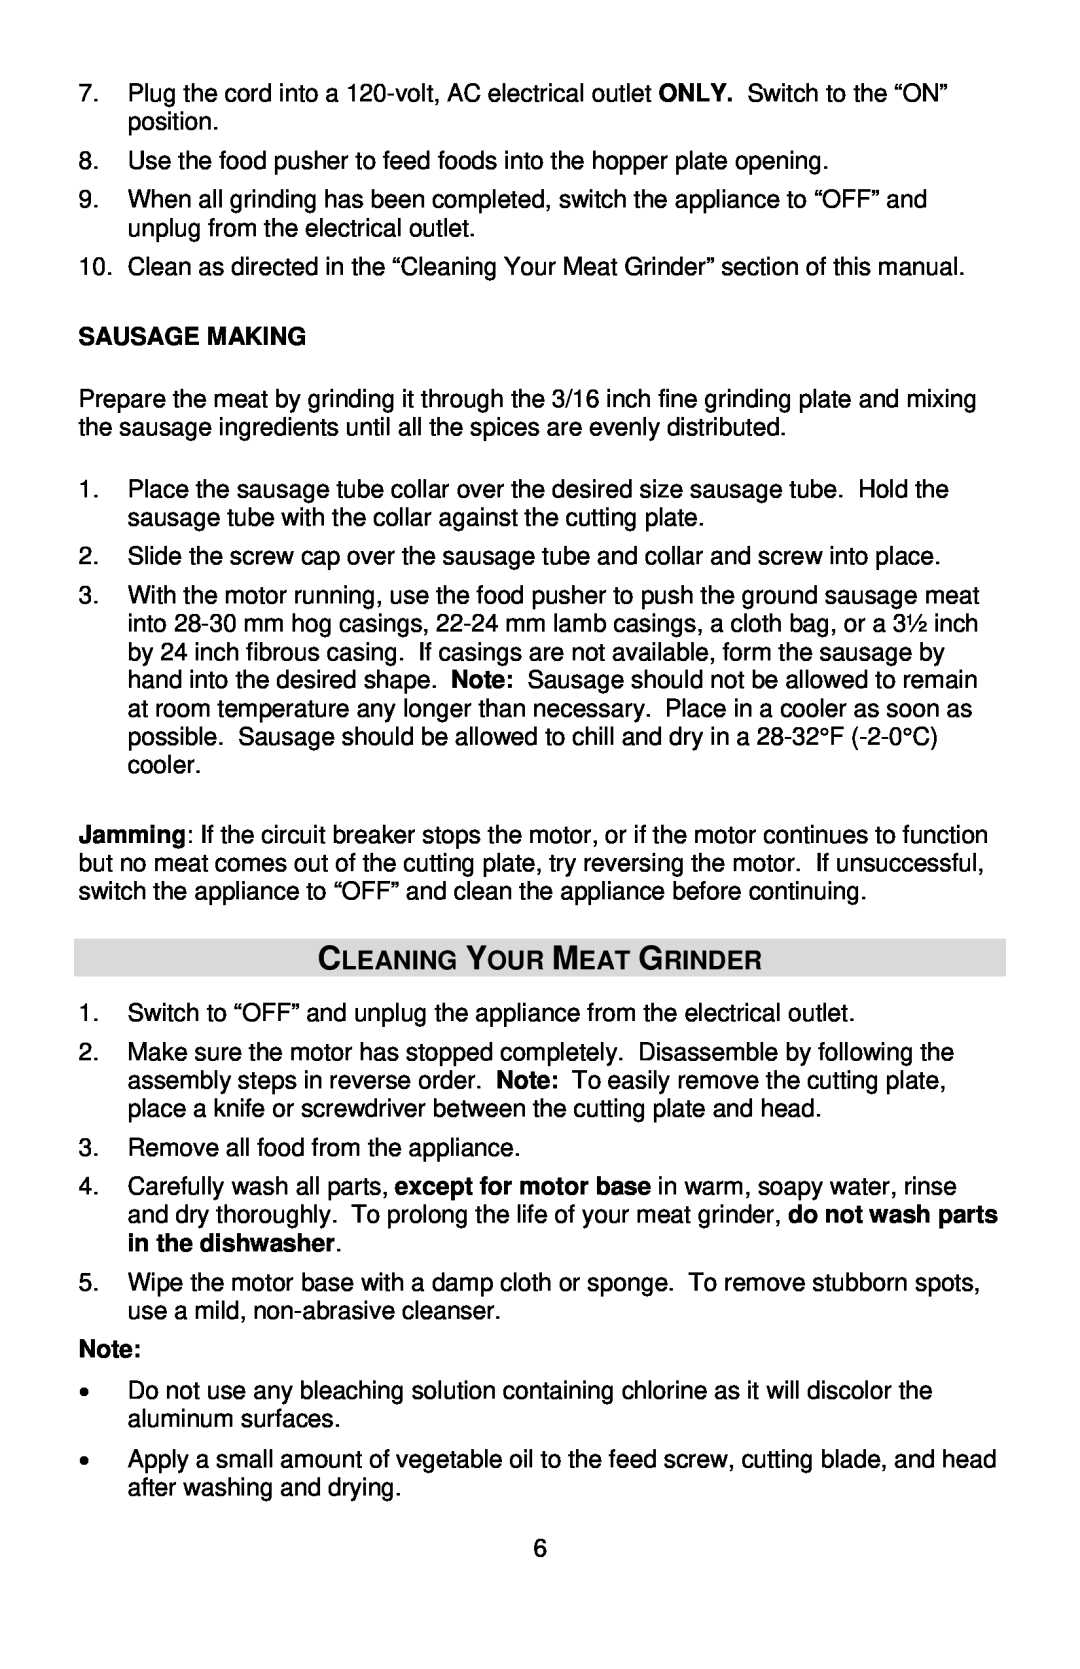 West Bend Back to Basics 4500 instruction manual Cleaning Your Meat Grinder, Sausage Making 